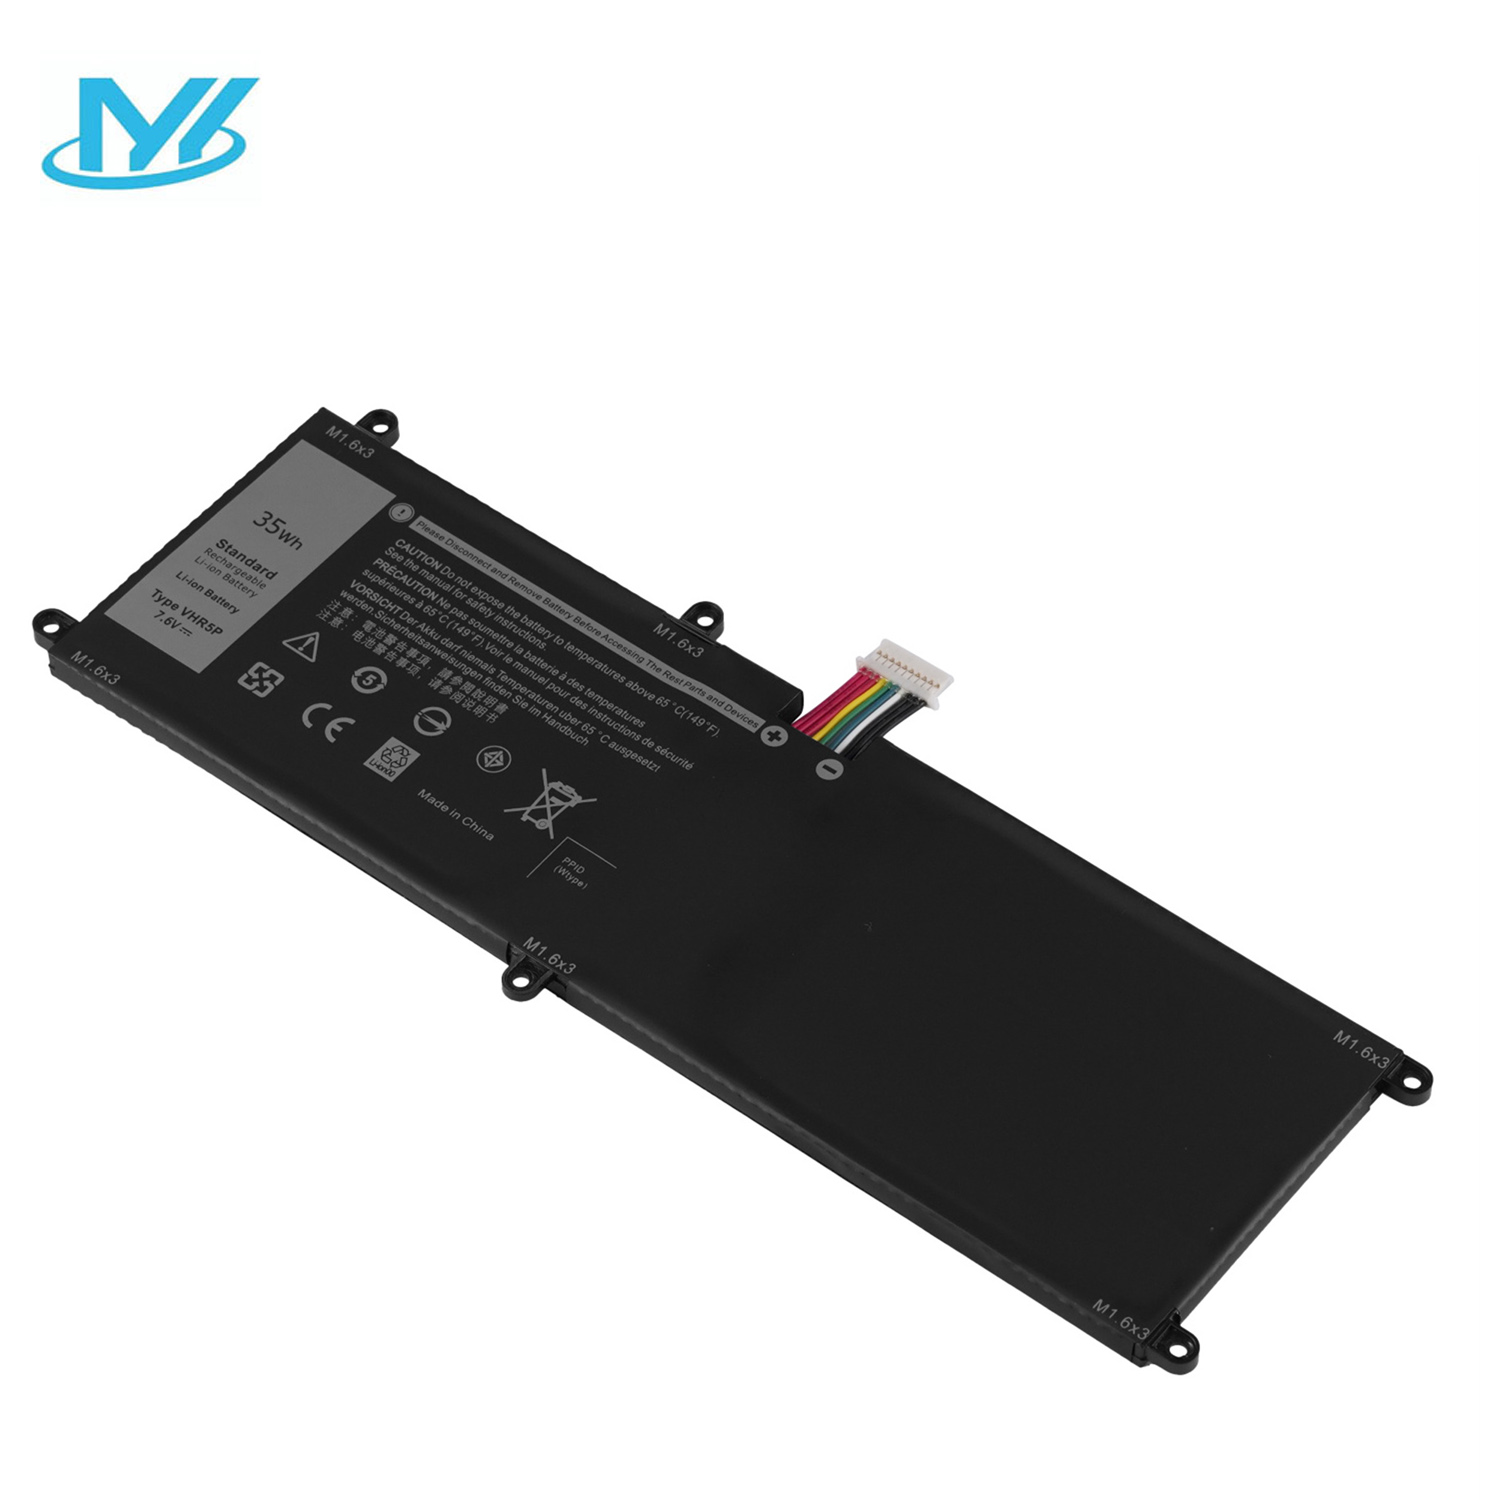 VHR5P rechargeable lithium ion Notebook battery Laptop battery XRHWG 0XRHWG RHF3V 7.6V 35Wh for Dell laptop Latitude 11 5175 